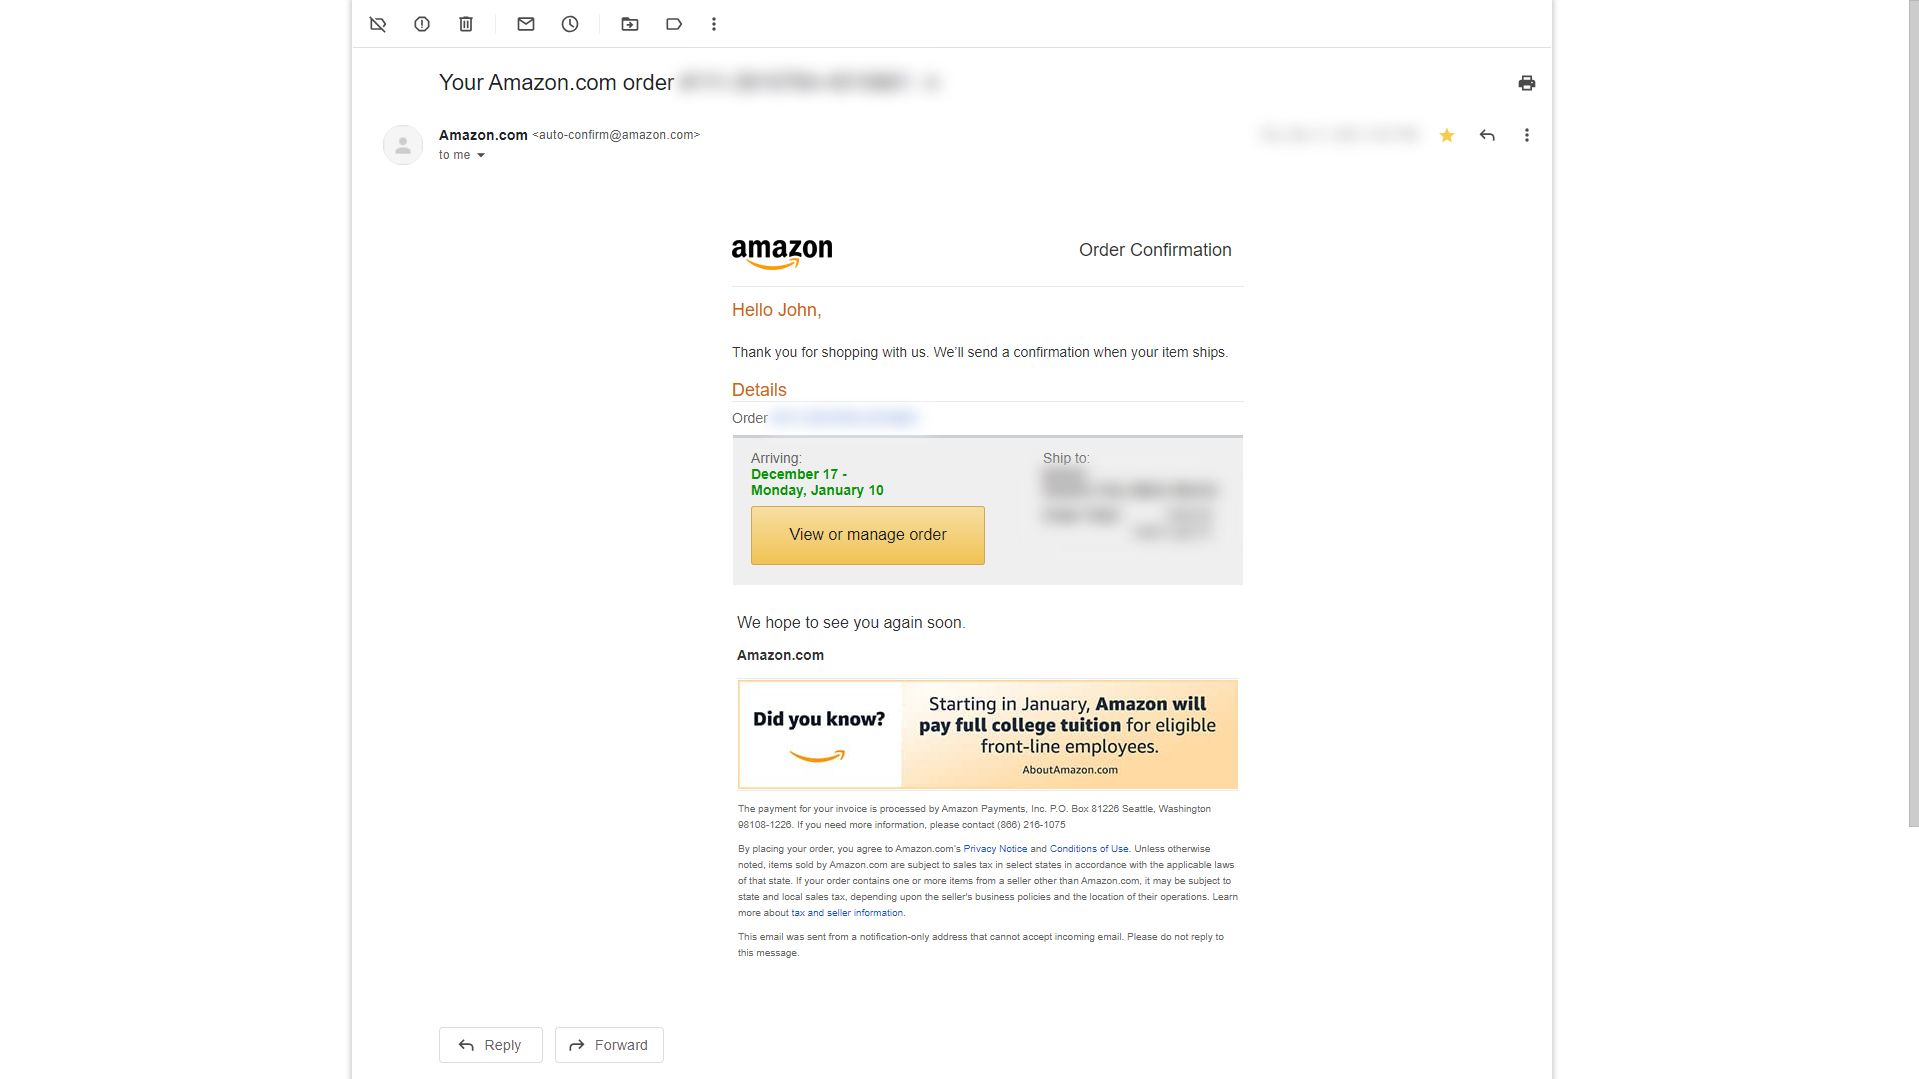 a legitimate Amazon Order Confirmation email